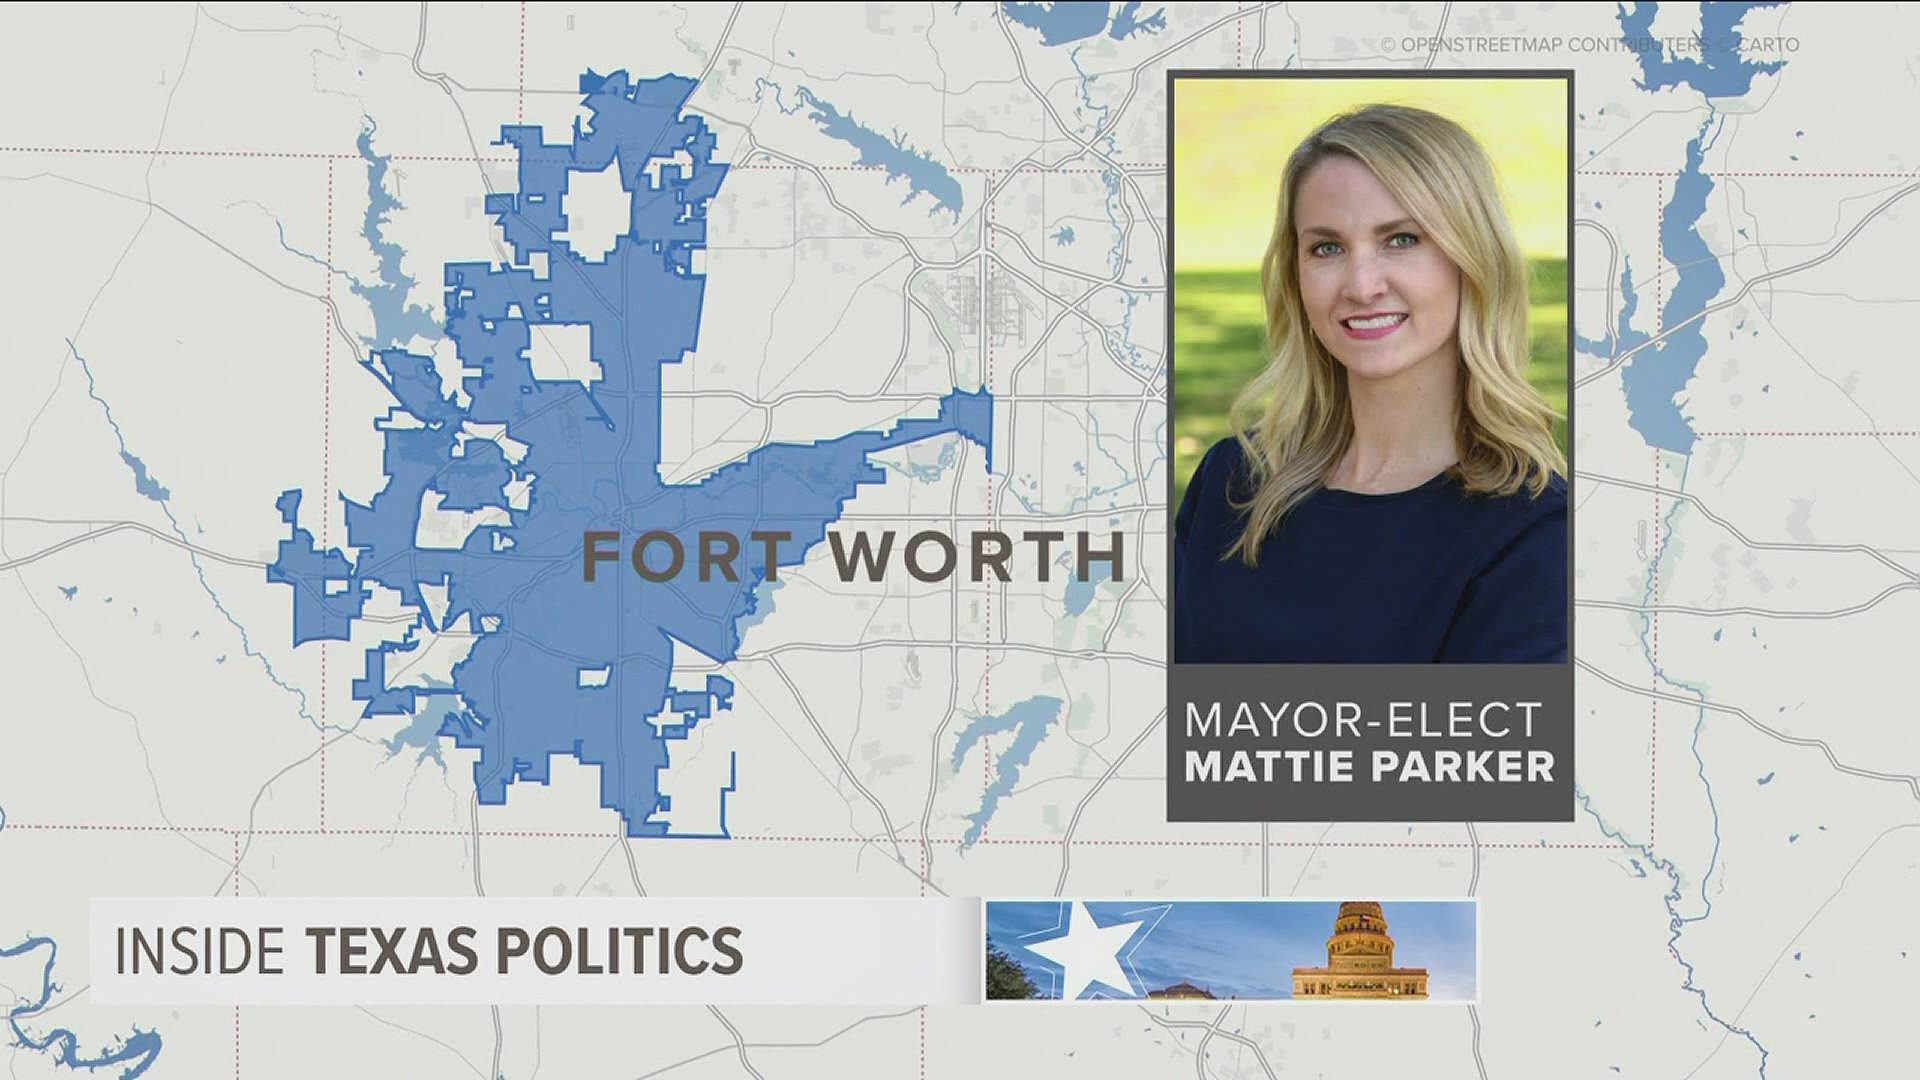 Mattie Parker, a millennial, will become mayor of Fort Worth on Tuesday. She'll be the youngest leader of any major city in the country.